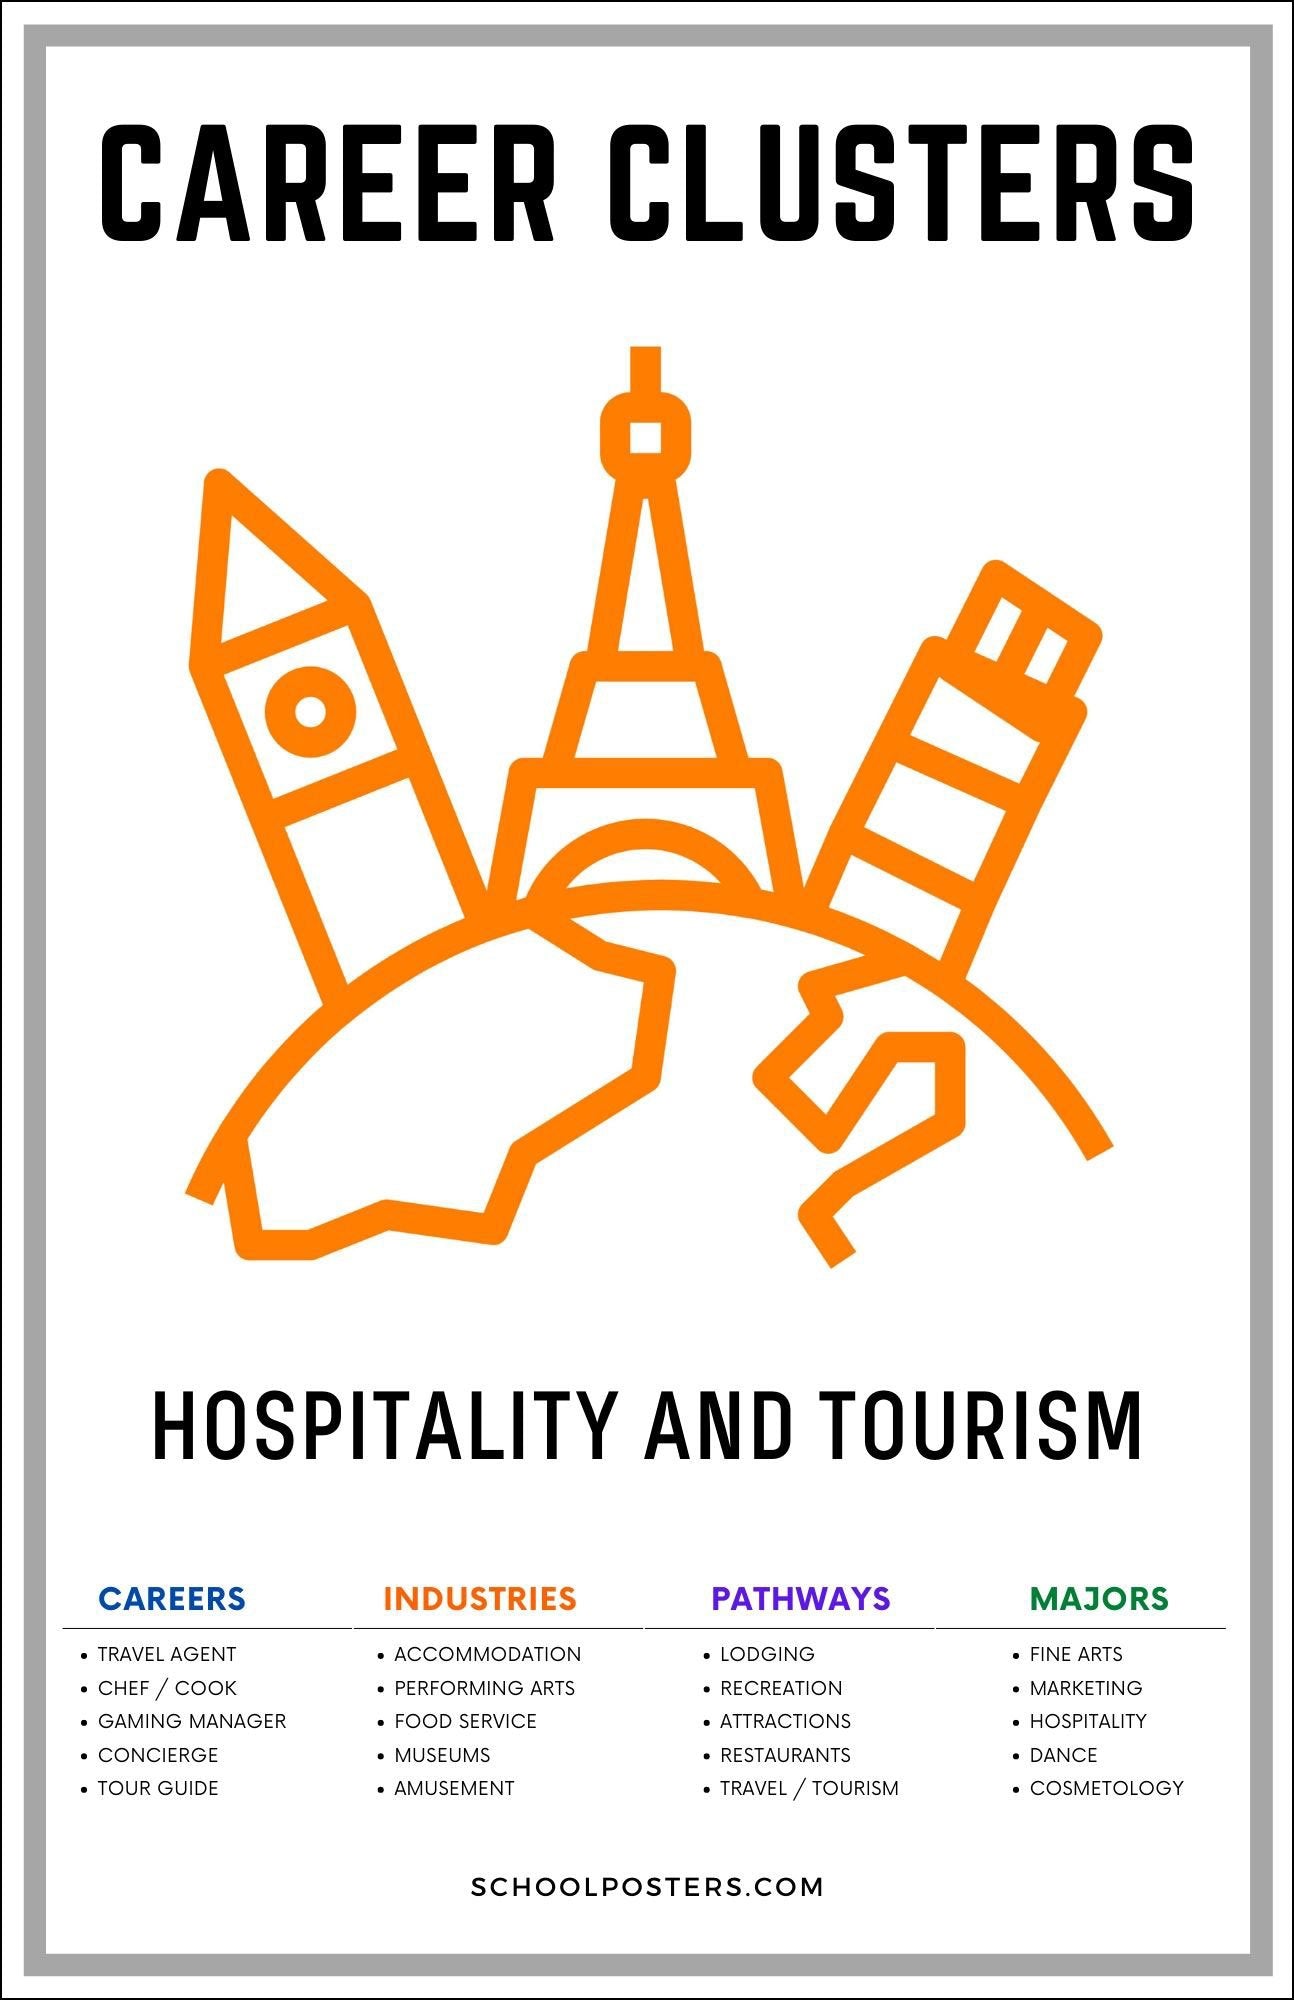 travel and tourism poster